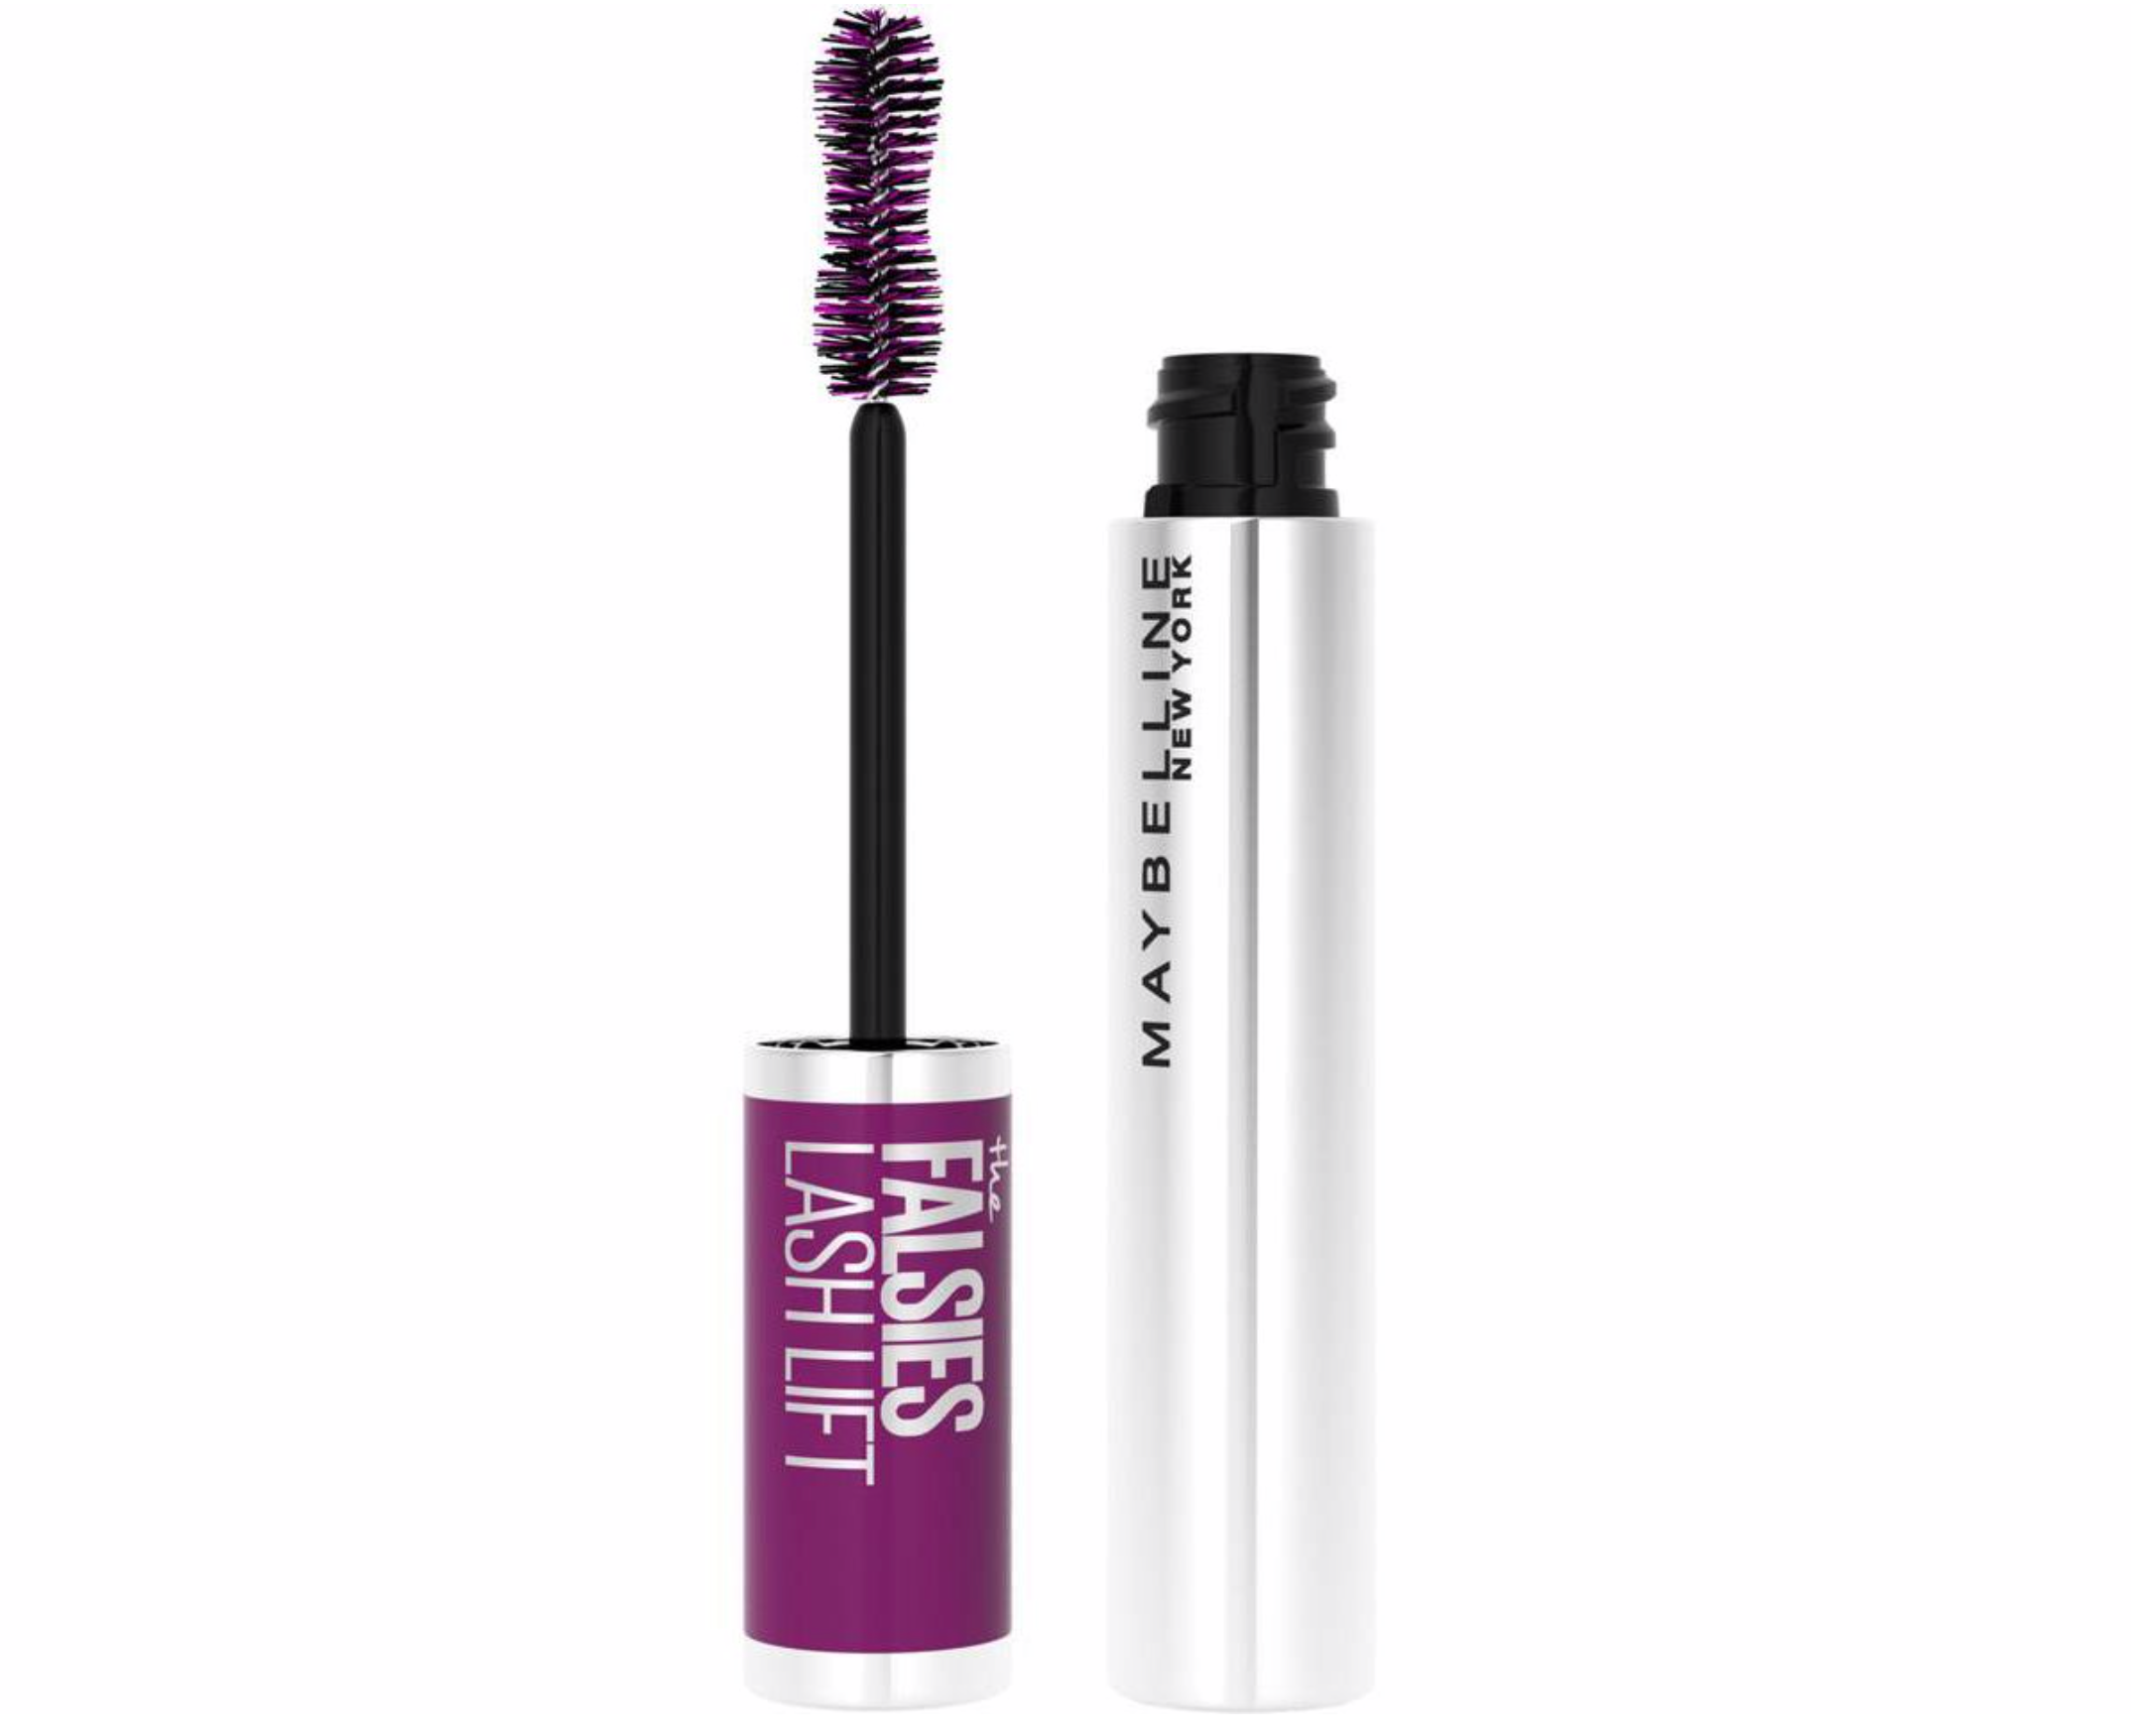 7 New Mascaras You Won't Want To Take Off